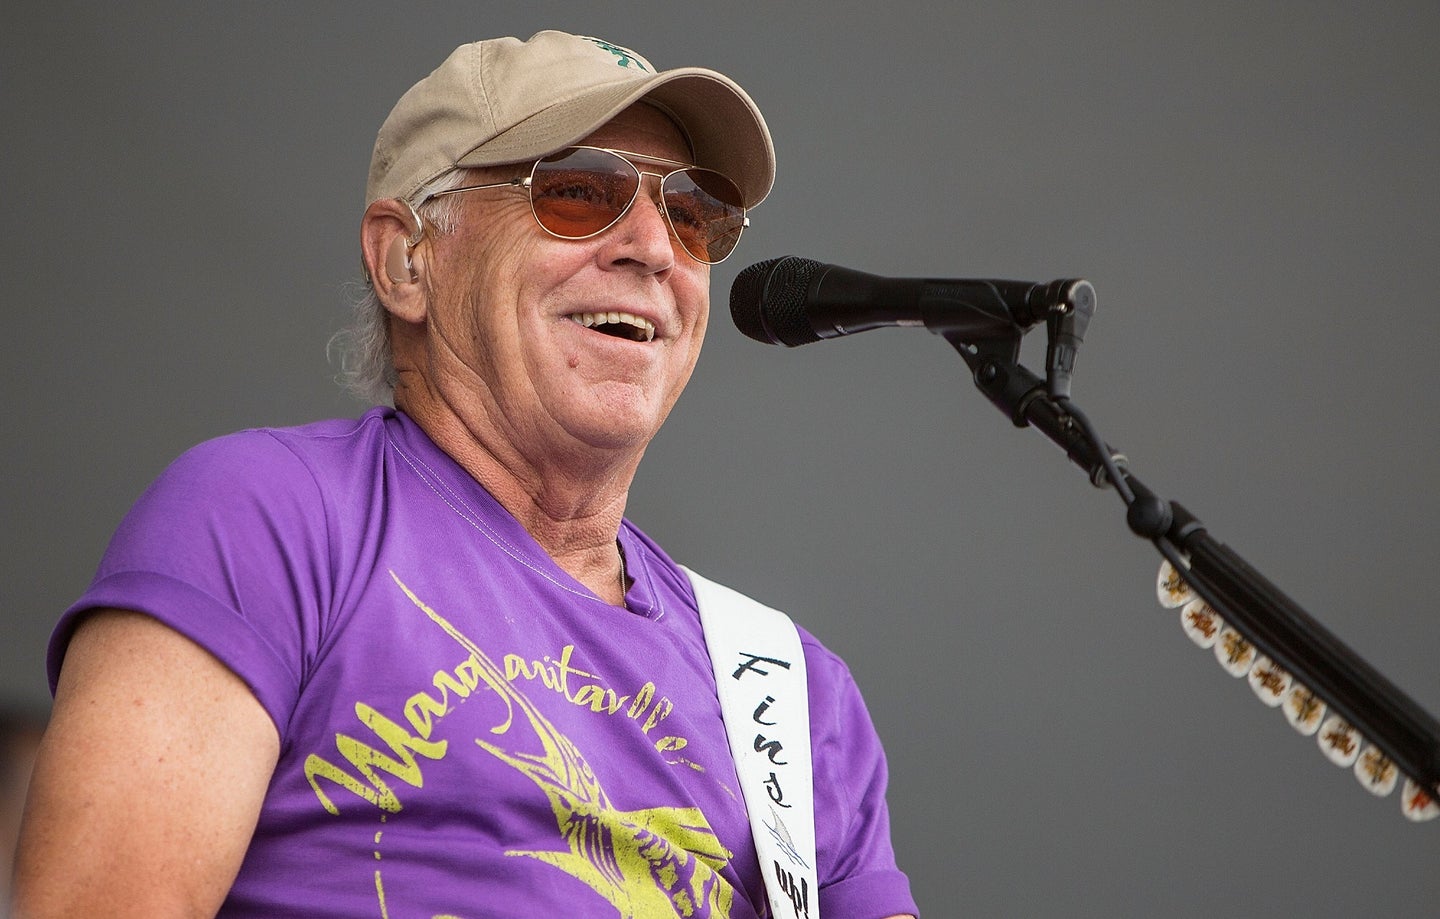 Singer Jimmy Buffet in a purple shirt by a microphone.